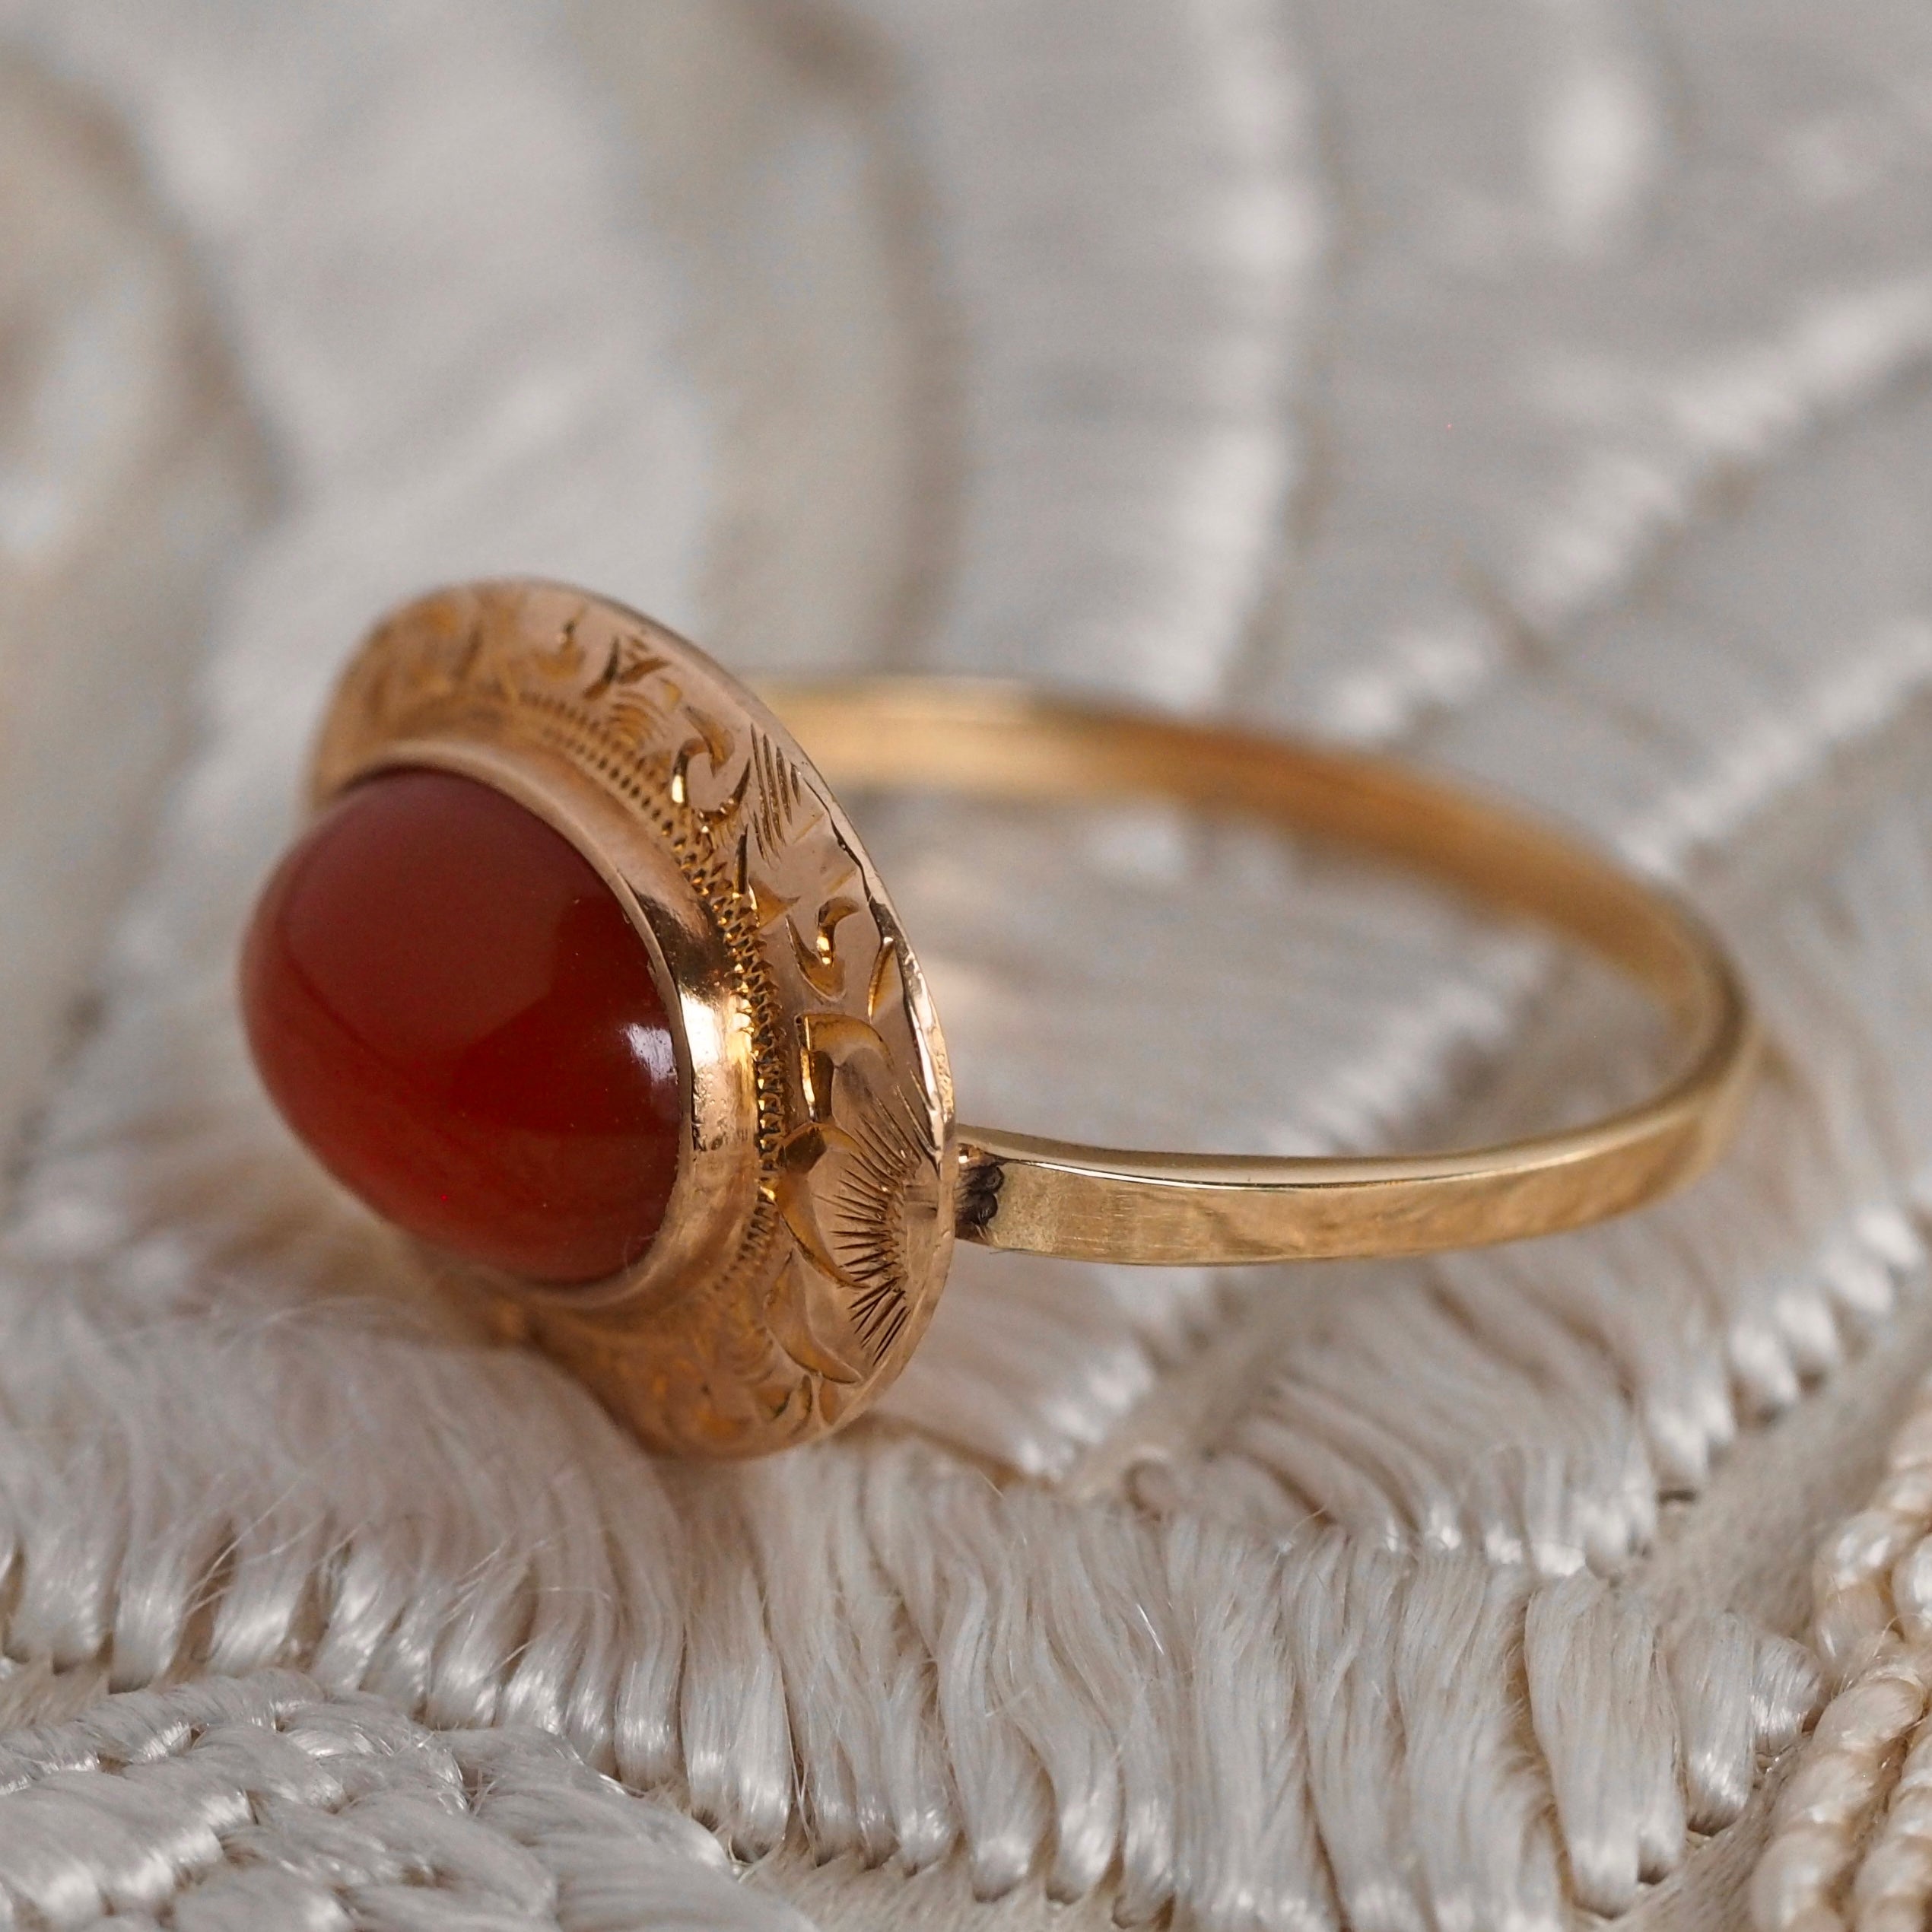 Antique Victorian 14k Gold Carnelian East West Ring